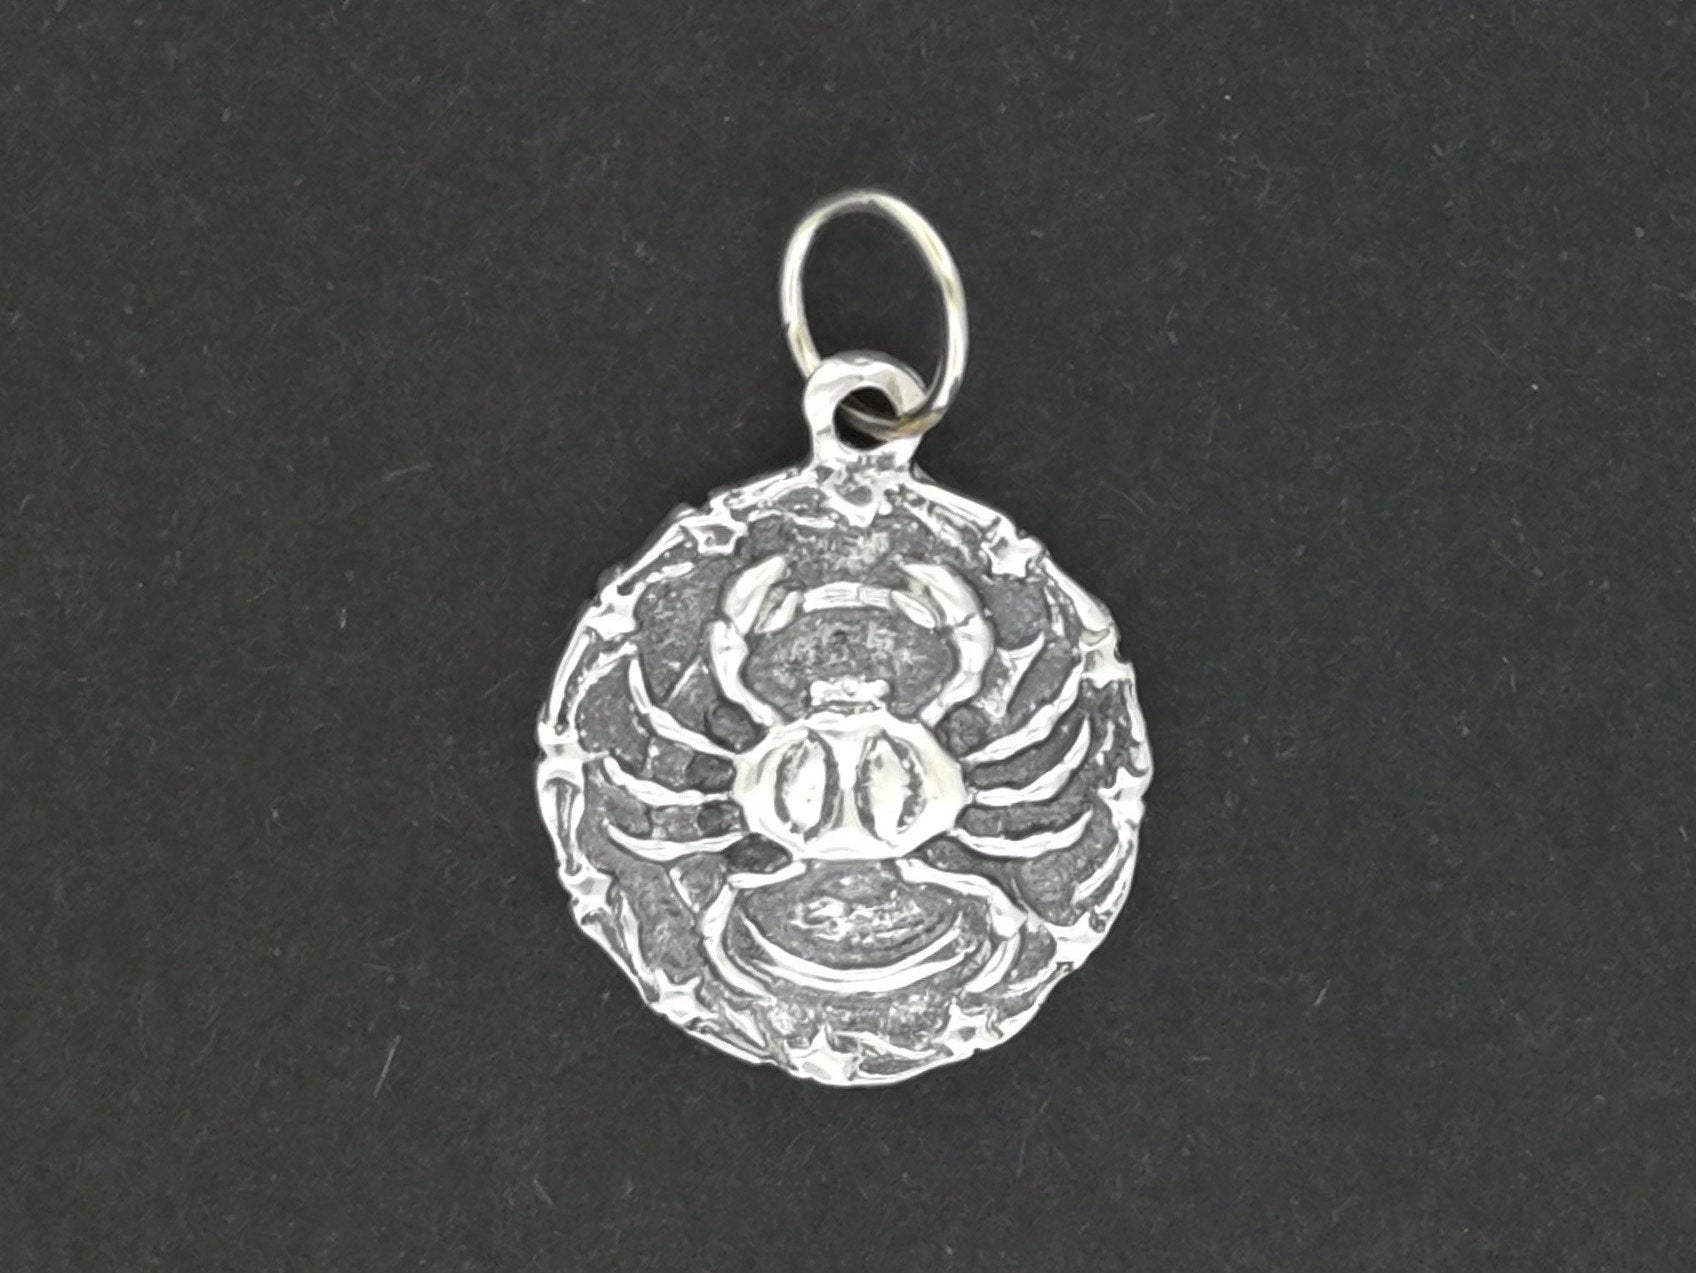 Zodiac Medallion Cancer in Sterling Silver and Antique Bronze, Silver Zodiac Medallion, Silver Zodiac Jewelry, Silver Zodiac Jewellery, Bronze Zodiac Pendant, Bronze Zodiac Jewelry, Silver Cancer Pendant, Silver Cancer Medallion, Cancer Zodiac Sign Pendant, Silver Retro Jewelry, Silver Retro Jewellery, Bronze Retro Jewelry, Bronze retro Jewellery, Cancer Zodiac Pendant, Birthstign Jewelry gift